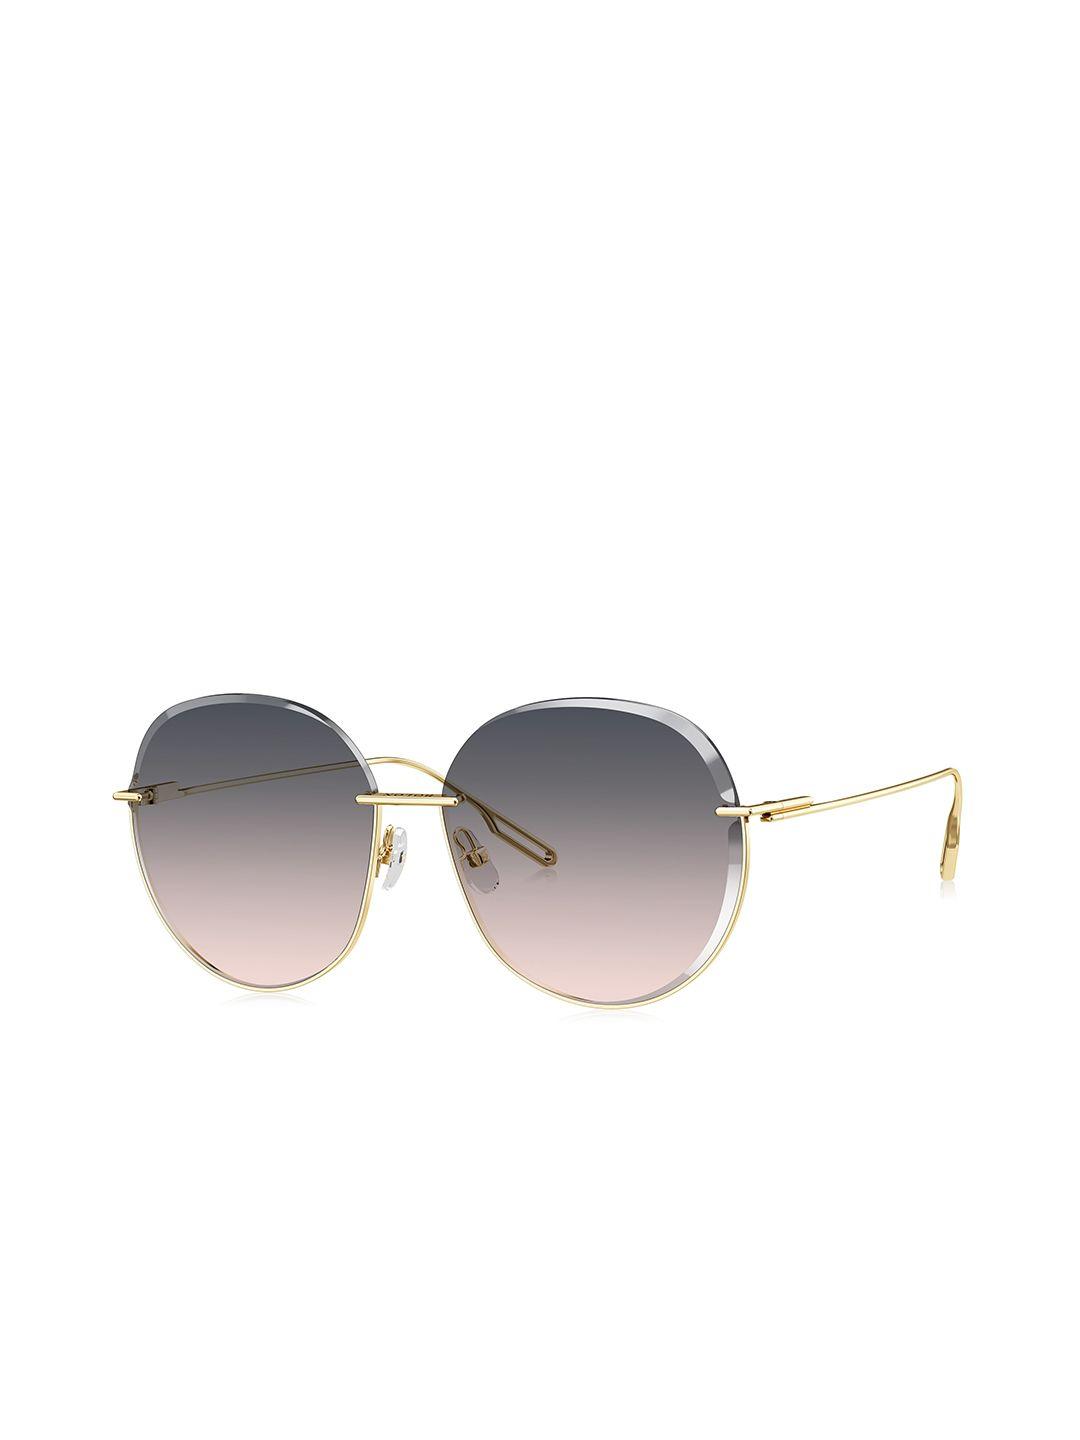 bolon-eyewear-women-blue-lens-&-gold-toned-round-sunglasses-with-uv-protected-lens